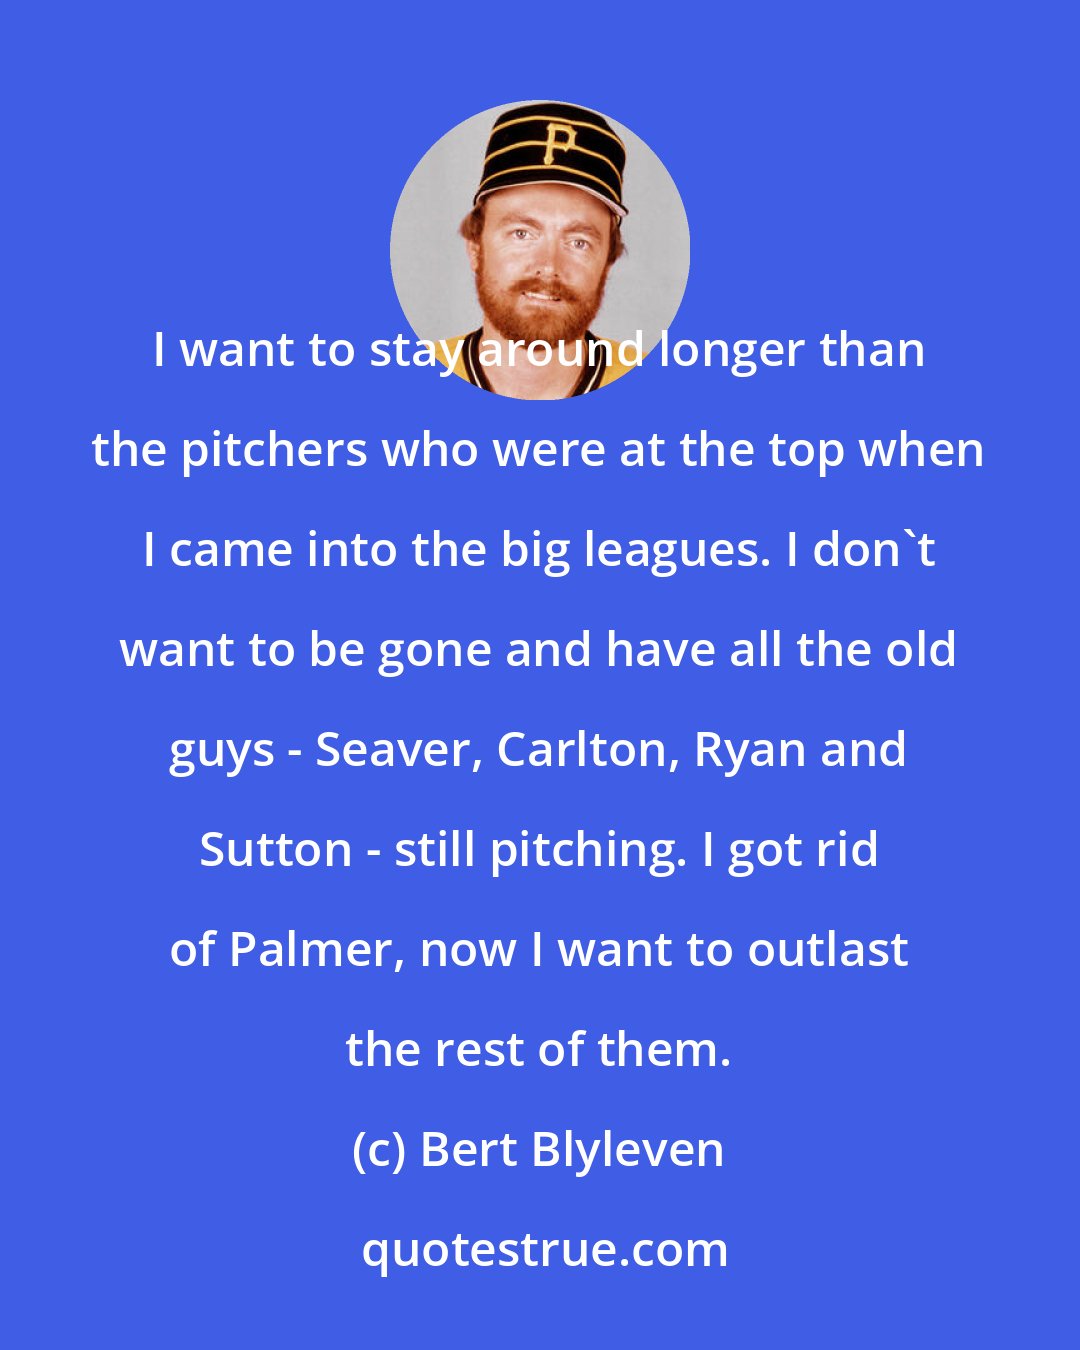 Bert Blyleven: I want to stay around longer than the pitchers who were at the top when I came into the big leagues. I don't want to be gone and have all the old guys - Seaver, Carlton, Ryan and Sutton - still pitching. I got rid of Palmer, now I want to outlast the rest of them.